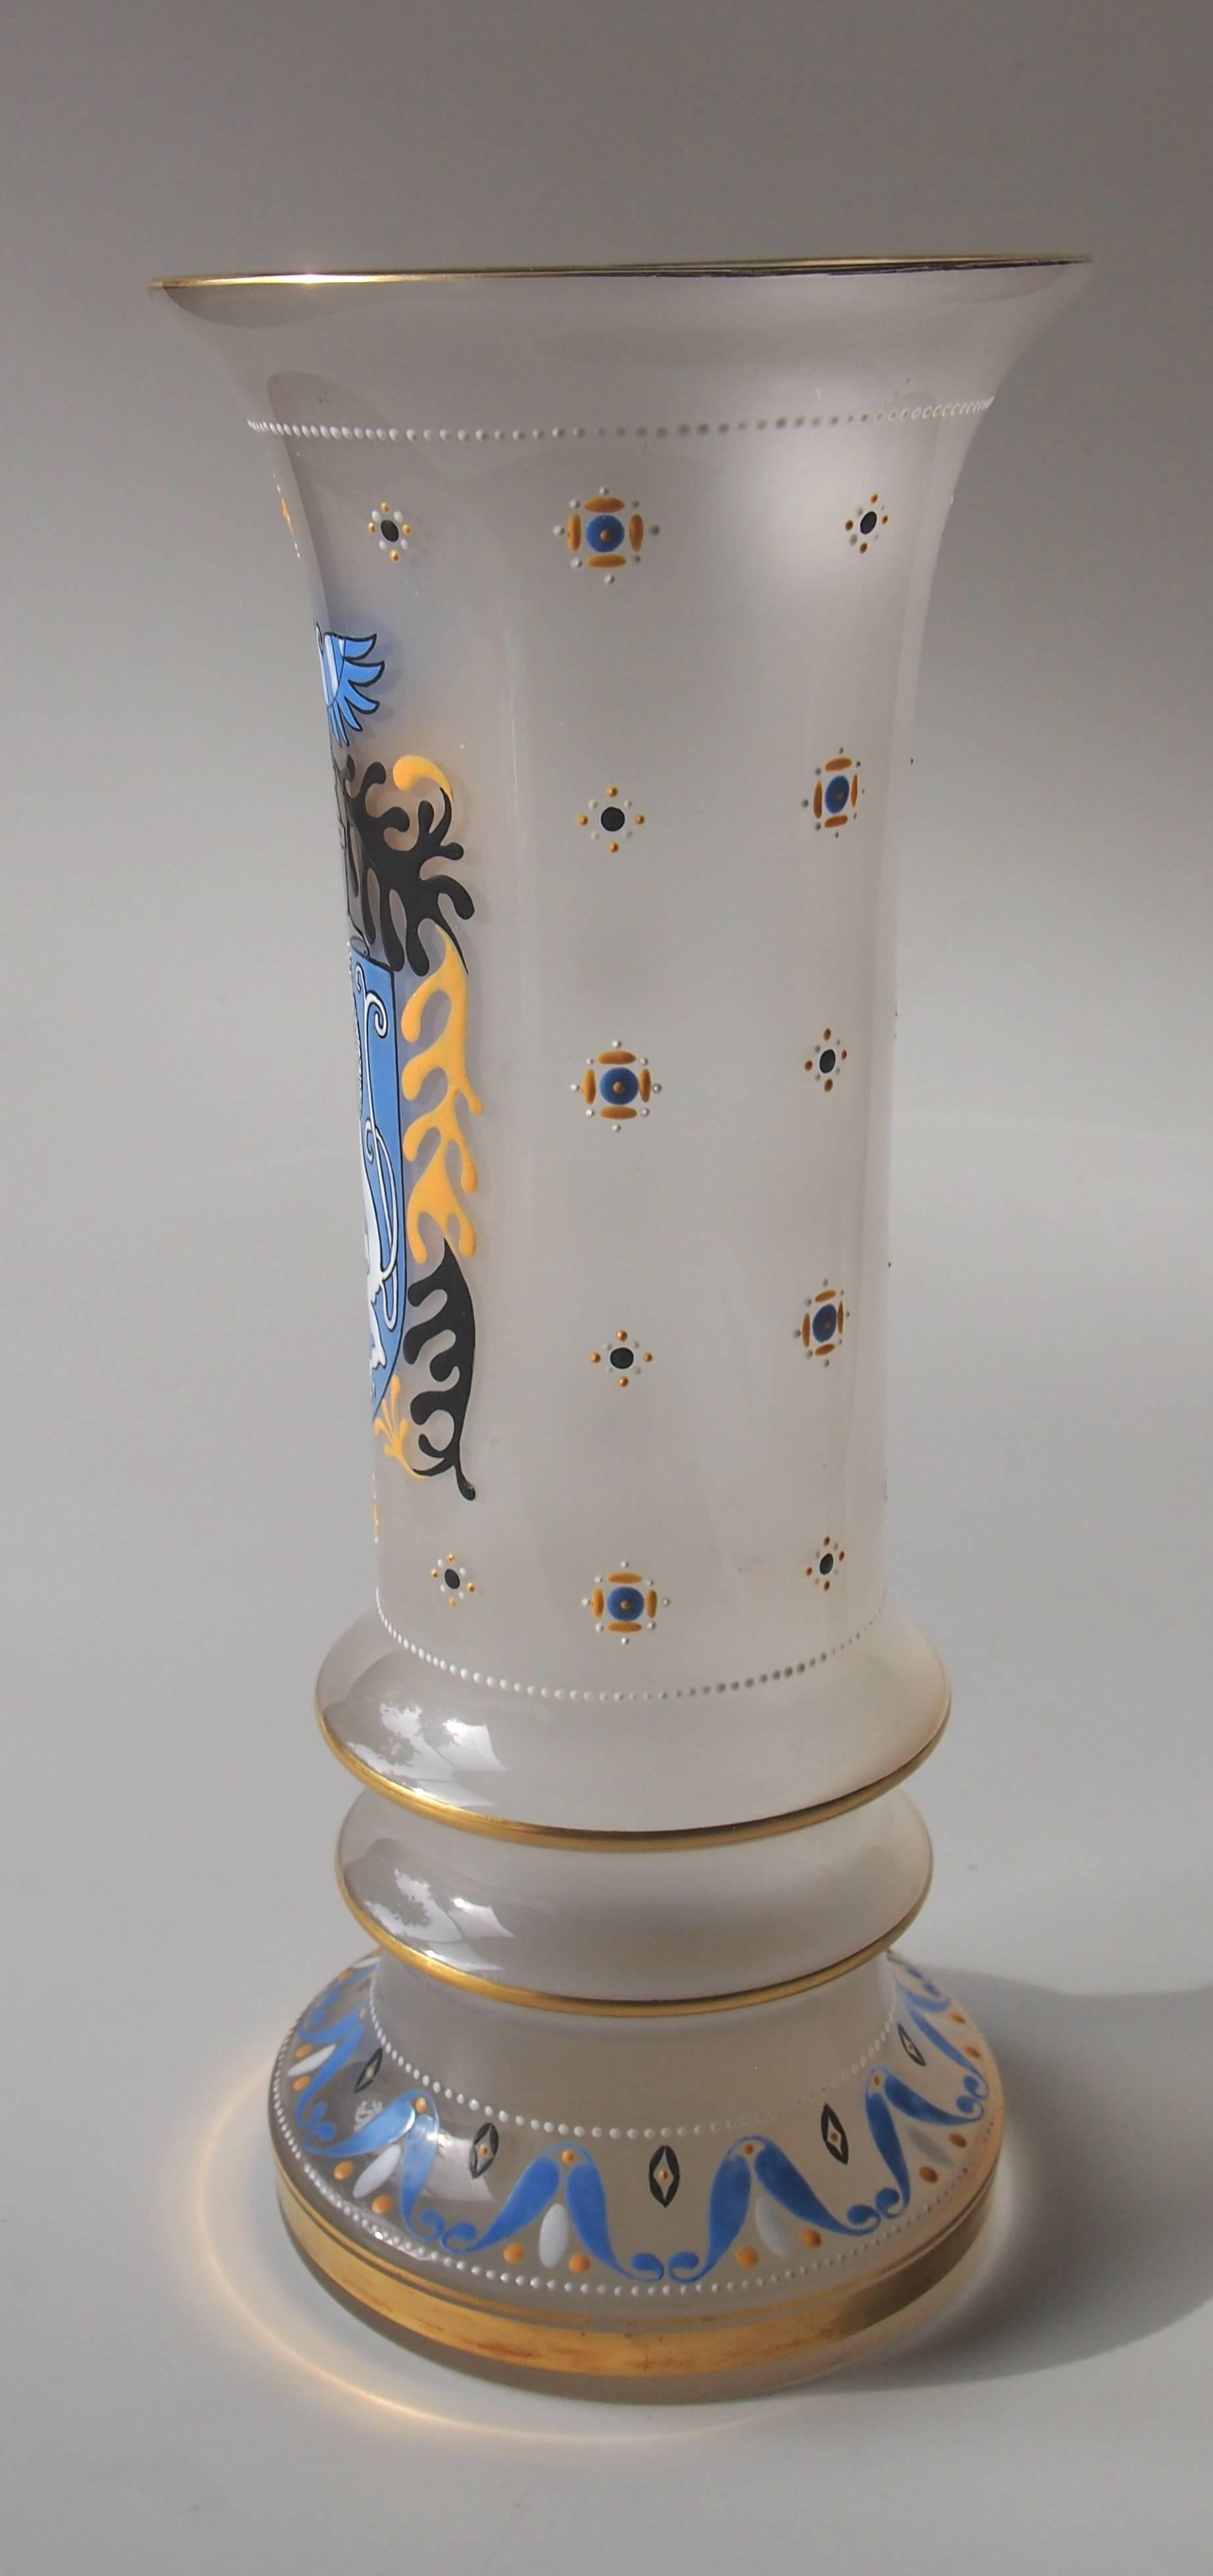 Signed Fachschule Steinschönau armorial vase, frosted/milk glass effect with finely enamelled floral décor, depicting the arms of the local regional capital Decin. Made between 1905-1914. Signed 'KKF - S.ST' for Fachschule Steinschönau, and with “M”